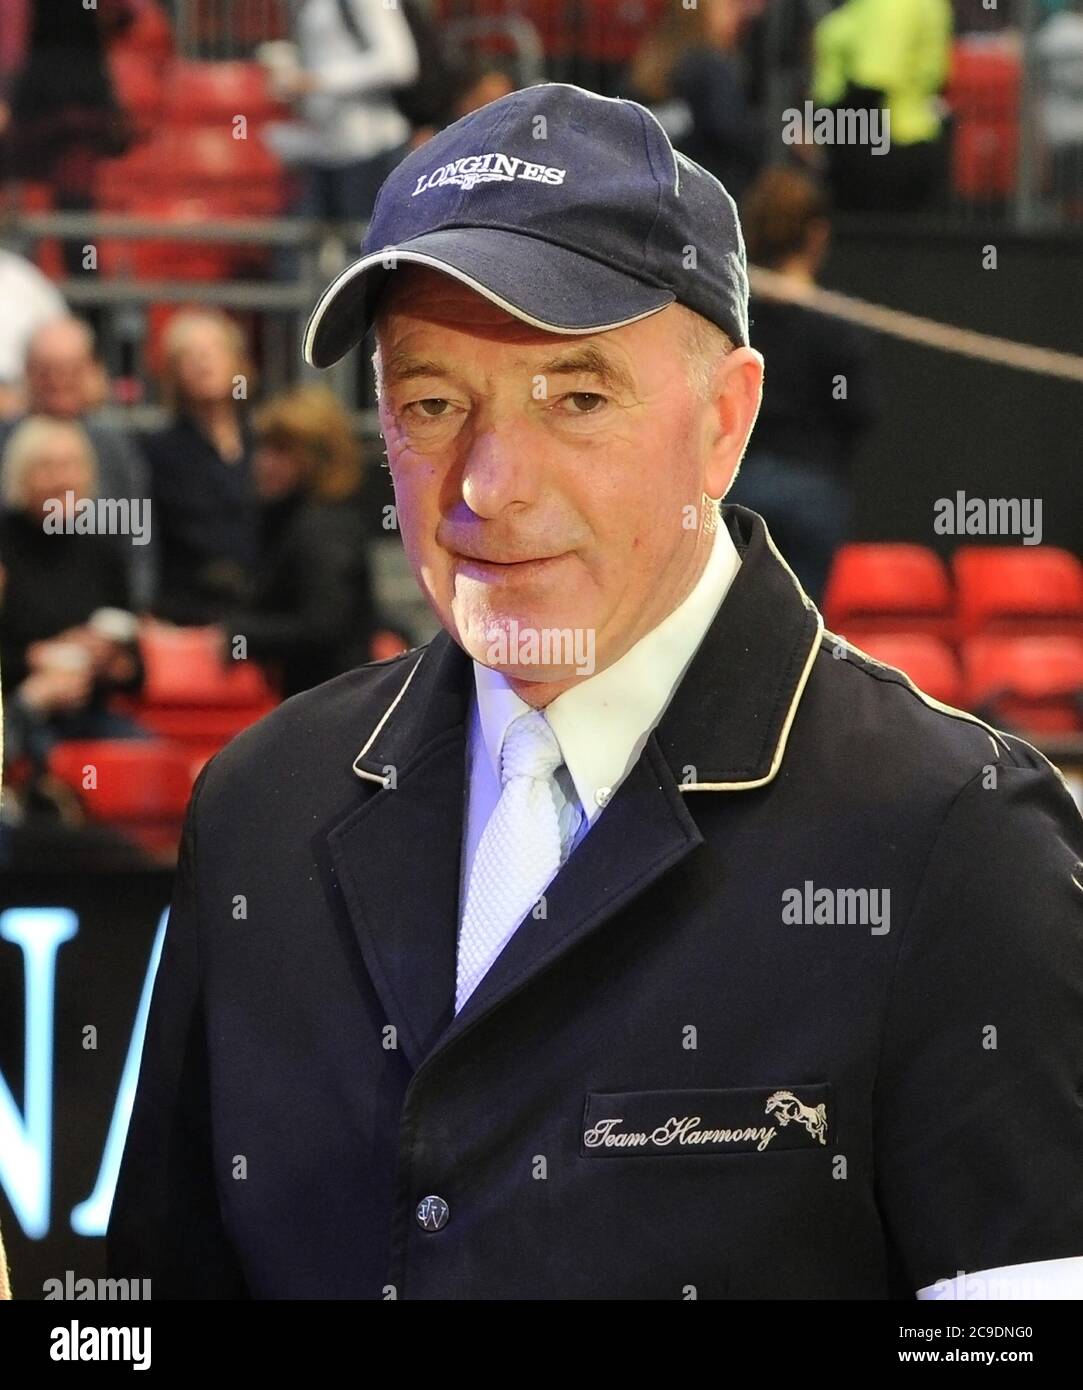 Olympia Friday 18.12.15 John Whitaker MBE is a British equestrian and Olympian who competes in show jumping. Stock Photo